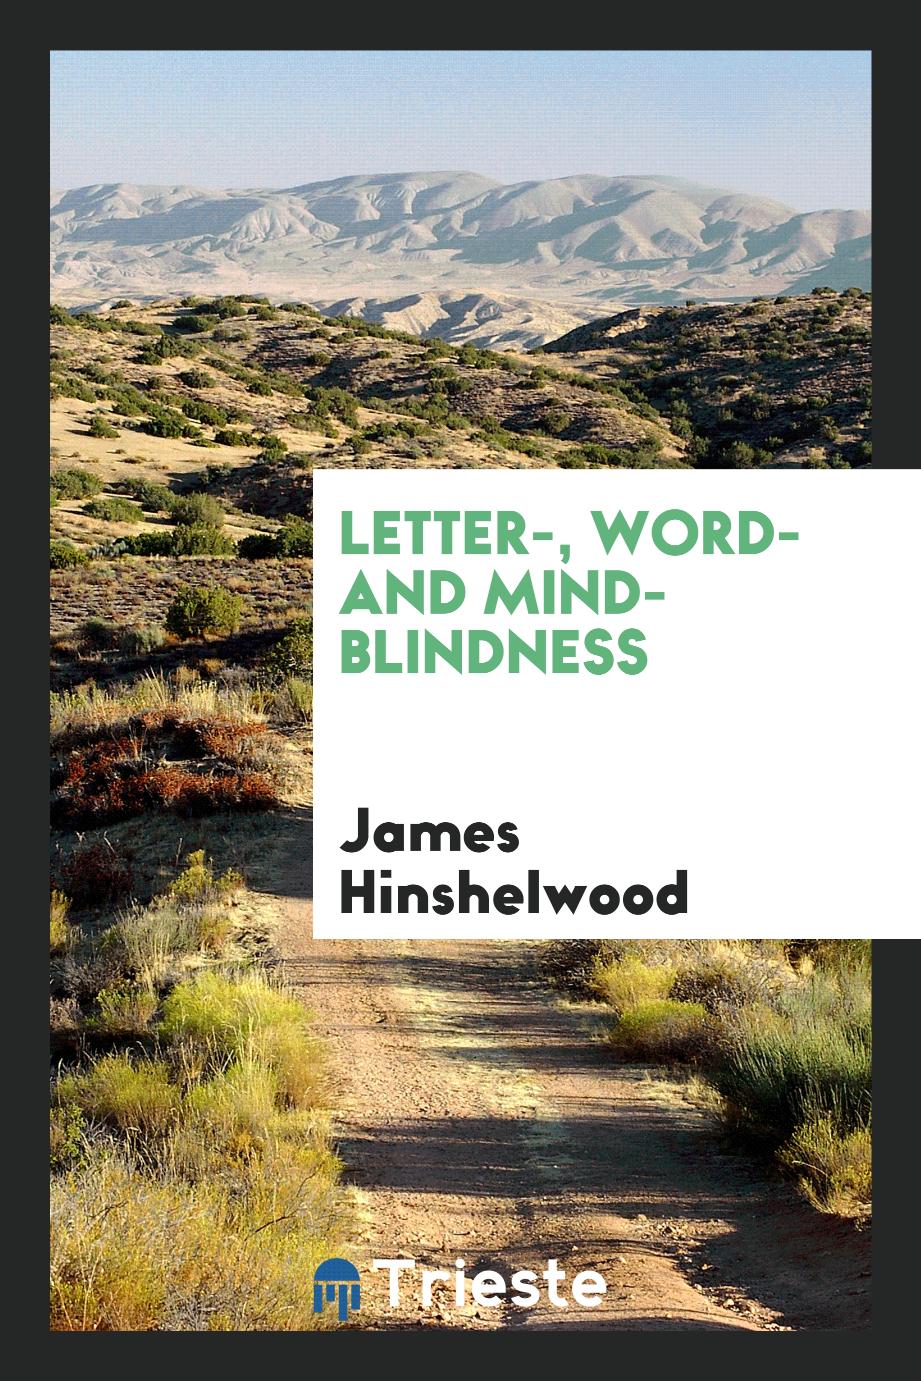 Letter-, Word- and Mind-Blindness